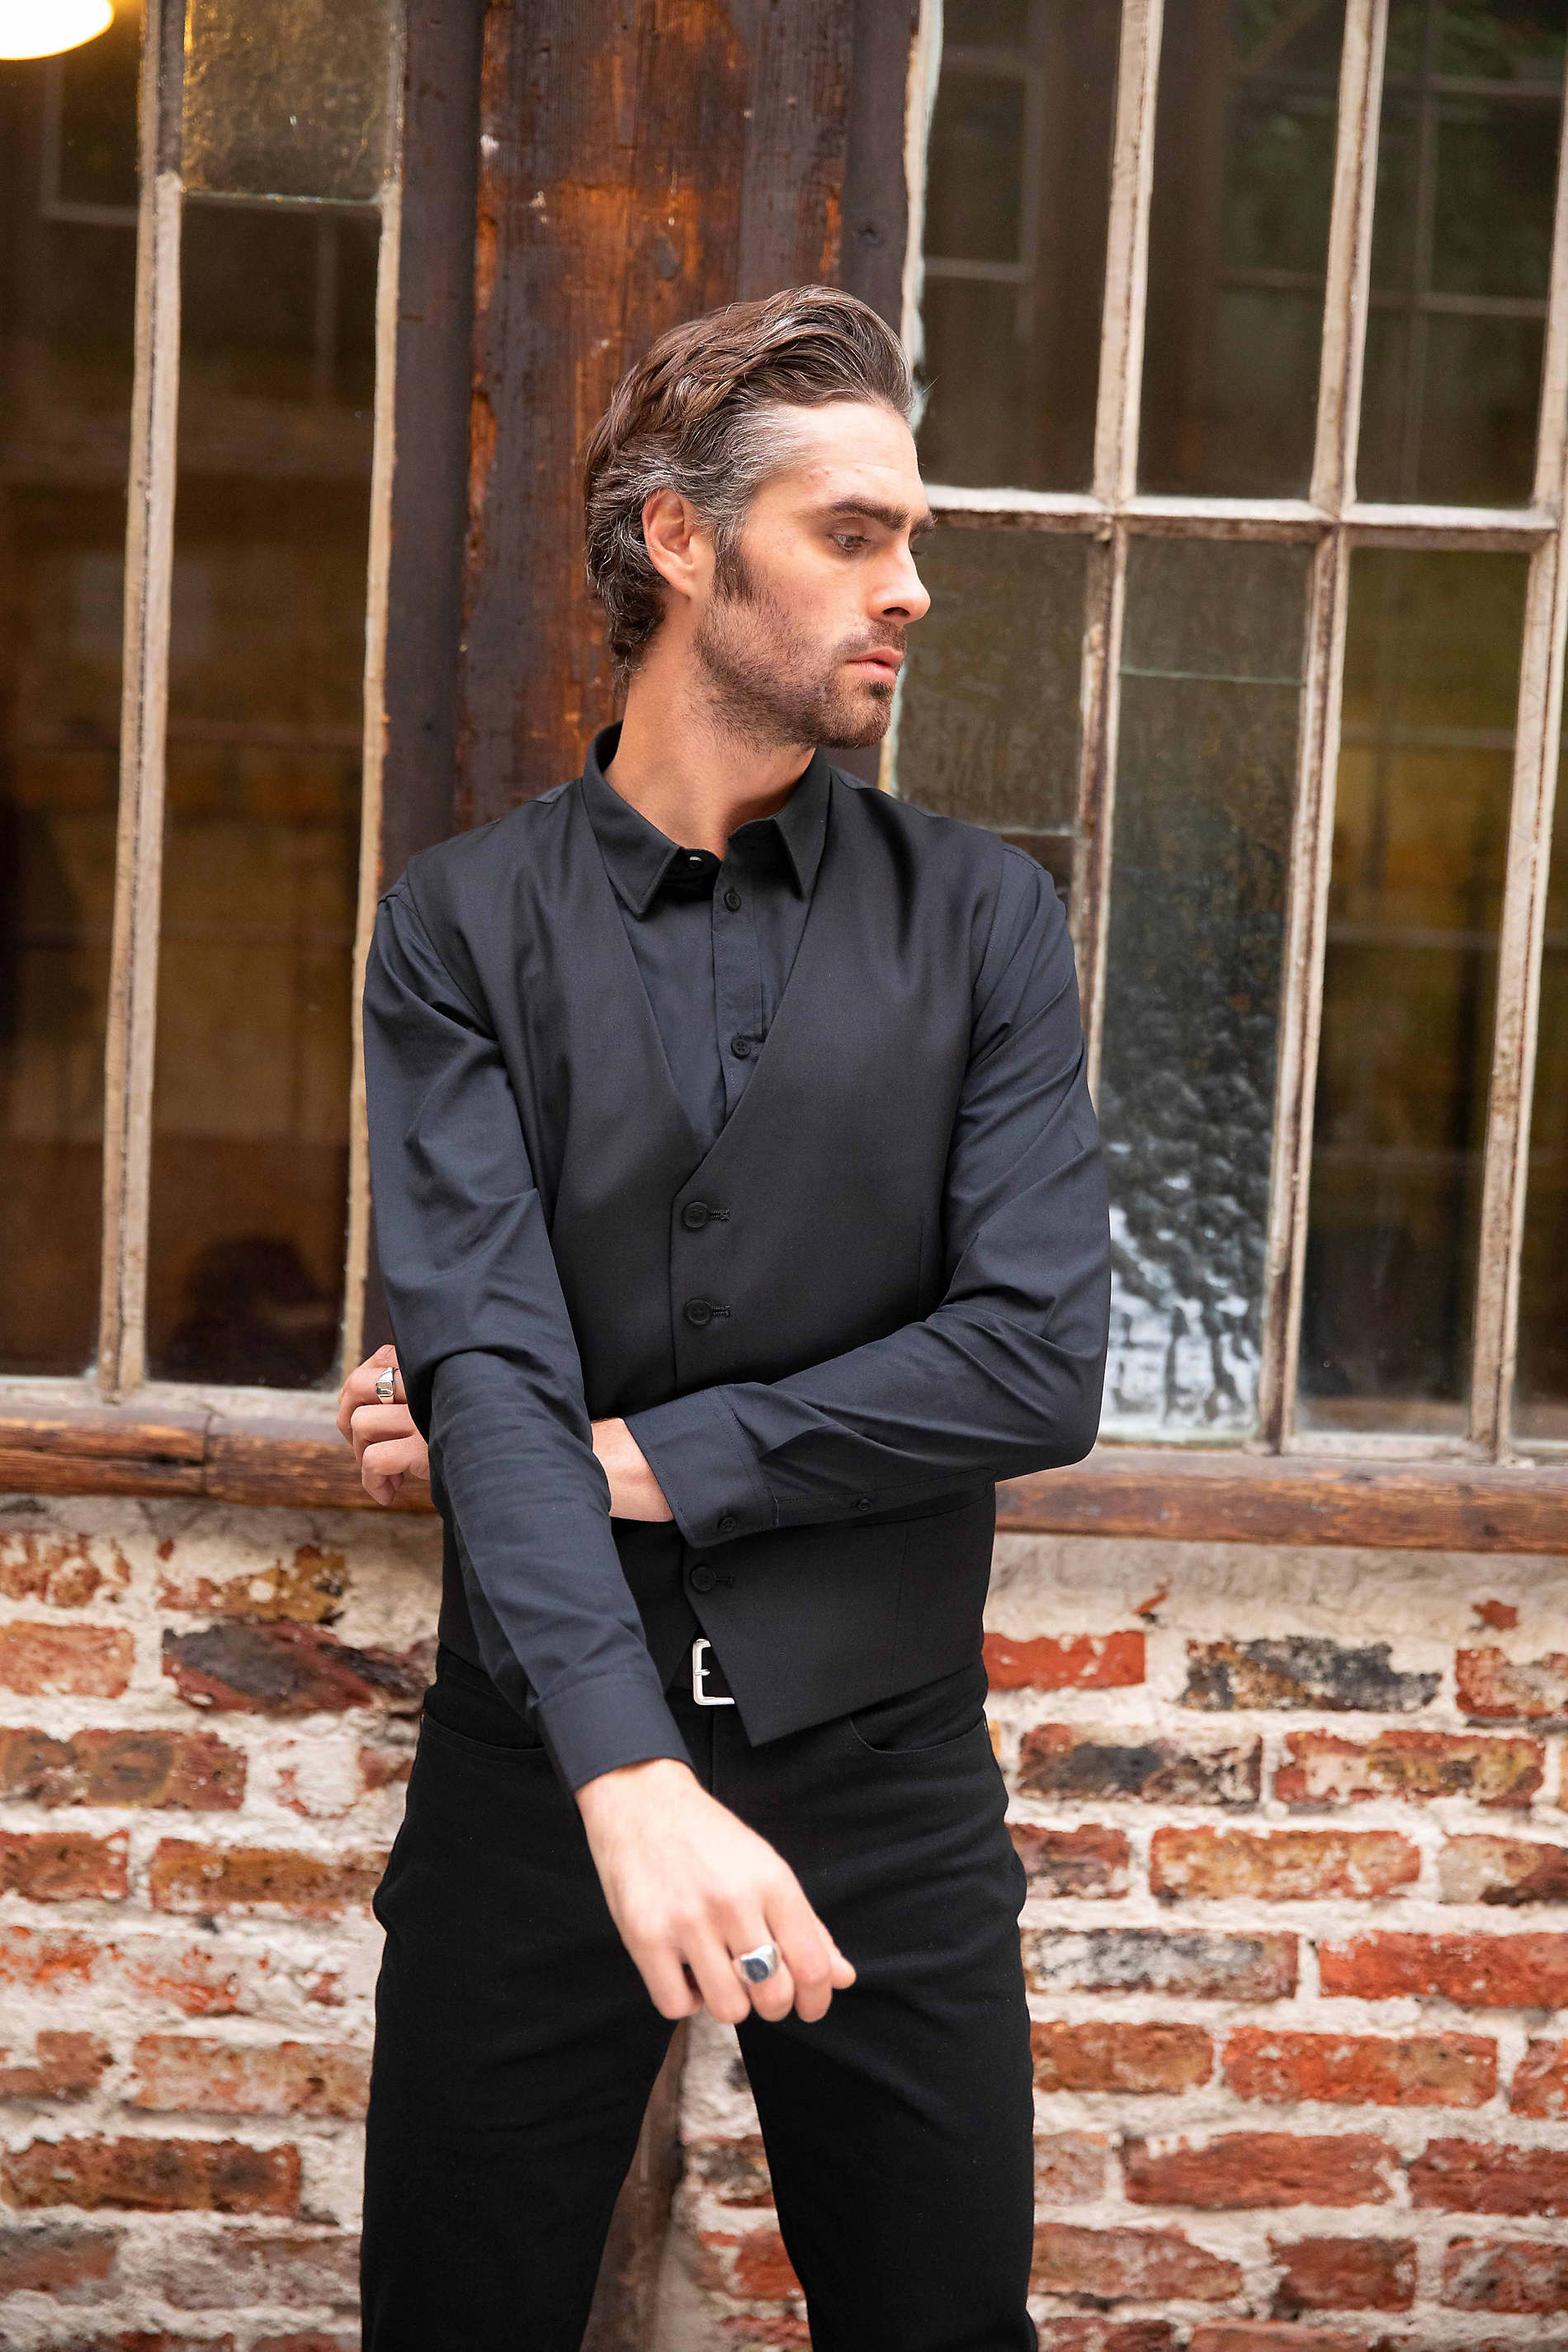 Men’s iron free shirt<p>Long associated with professional use, the shirt is now part of the everyday wardrobe. Its finishes, style and quality make it suitable for all situations. What's more, it doesn't need ironing, so there is no excuse not to wear it!<p> NEOBLU BLAISE MEN